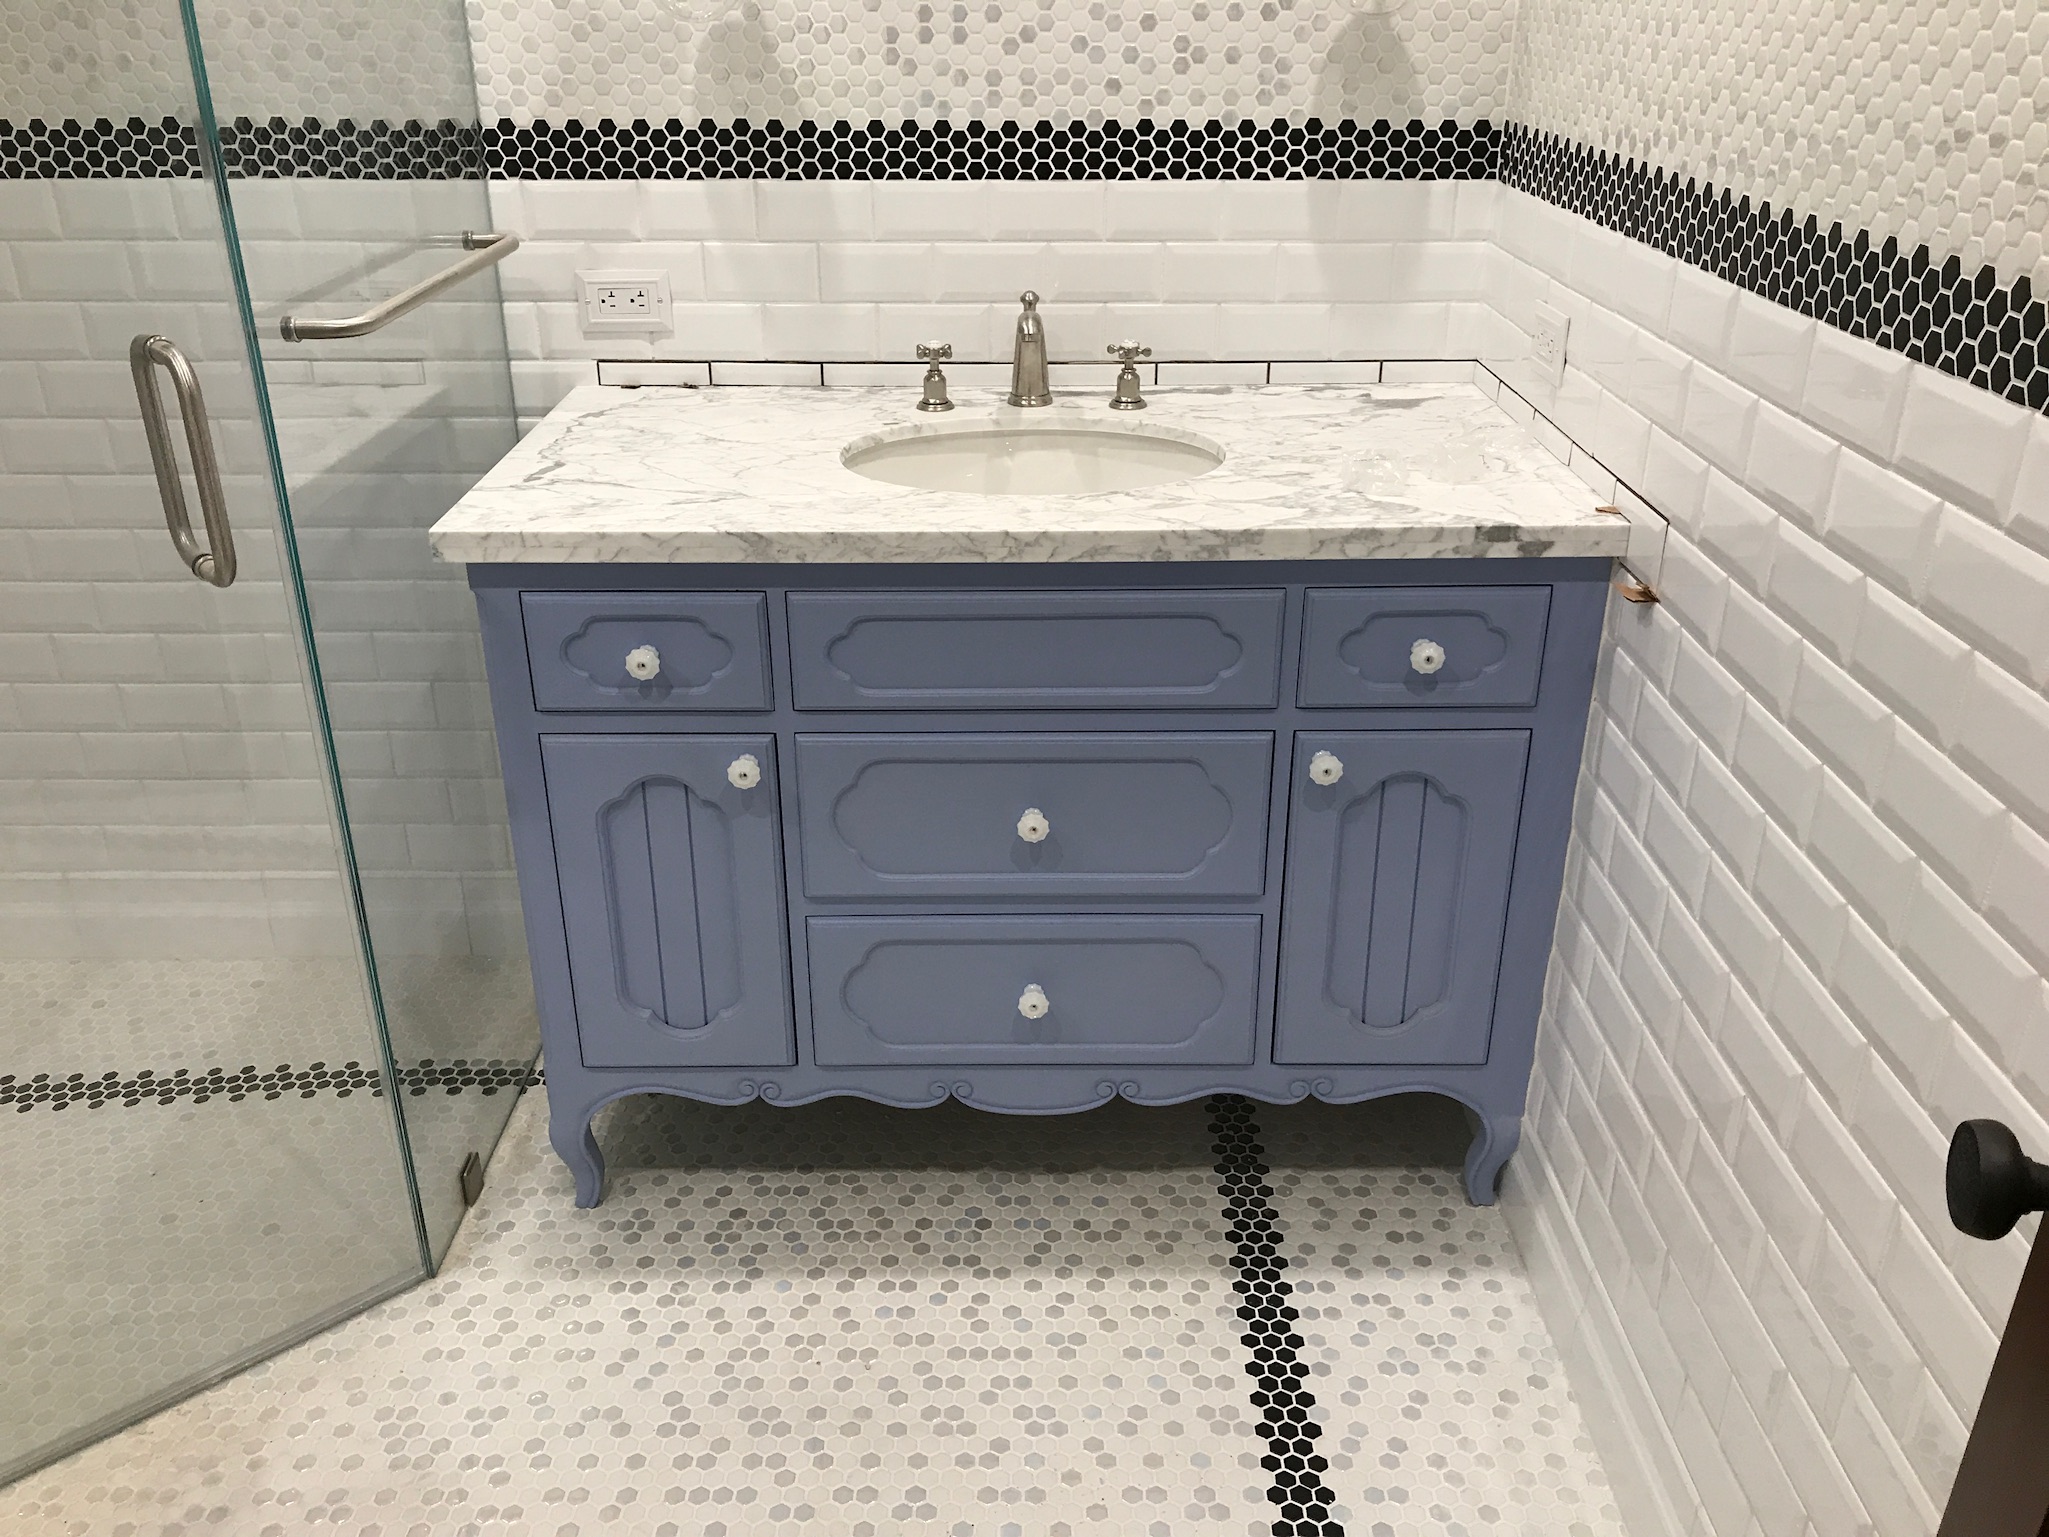 Bathrooms The French Tradition, French Sink Vanity